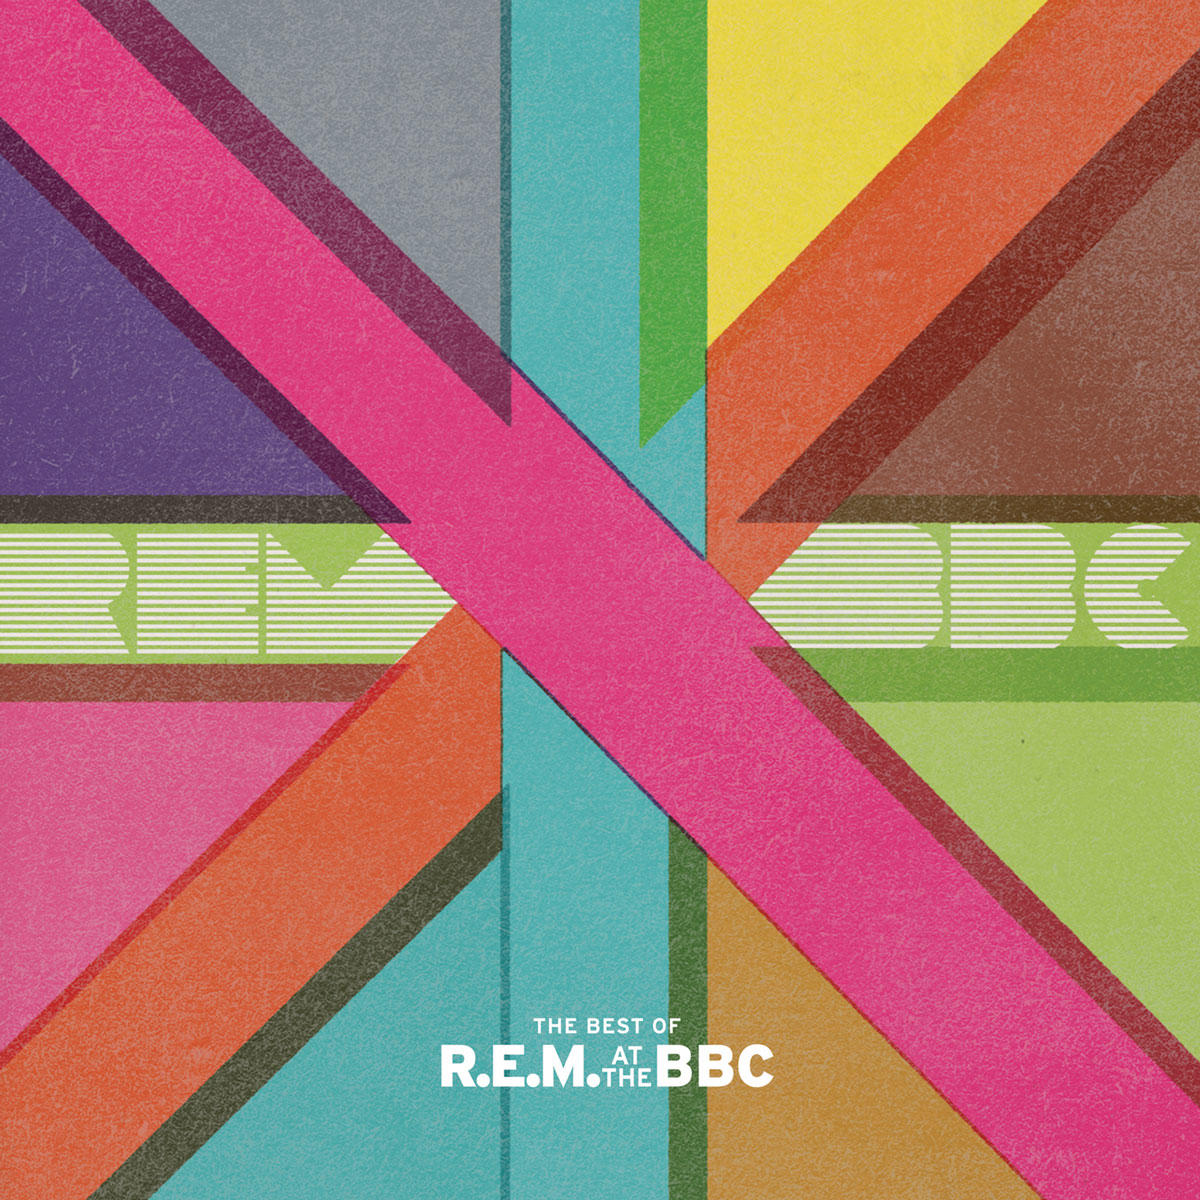 R.E.M. - The The - BBC R.E.M. Of (CD) Best At